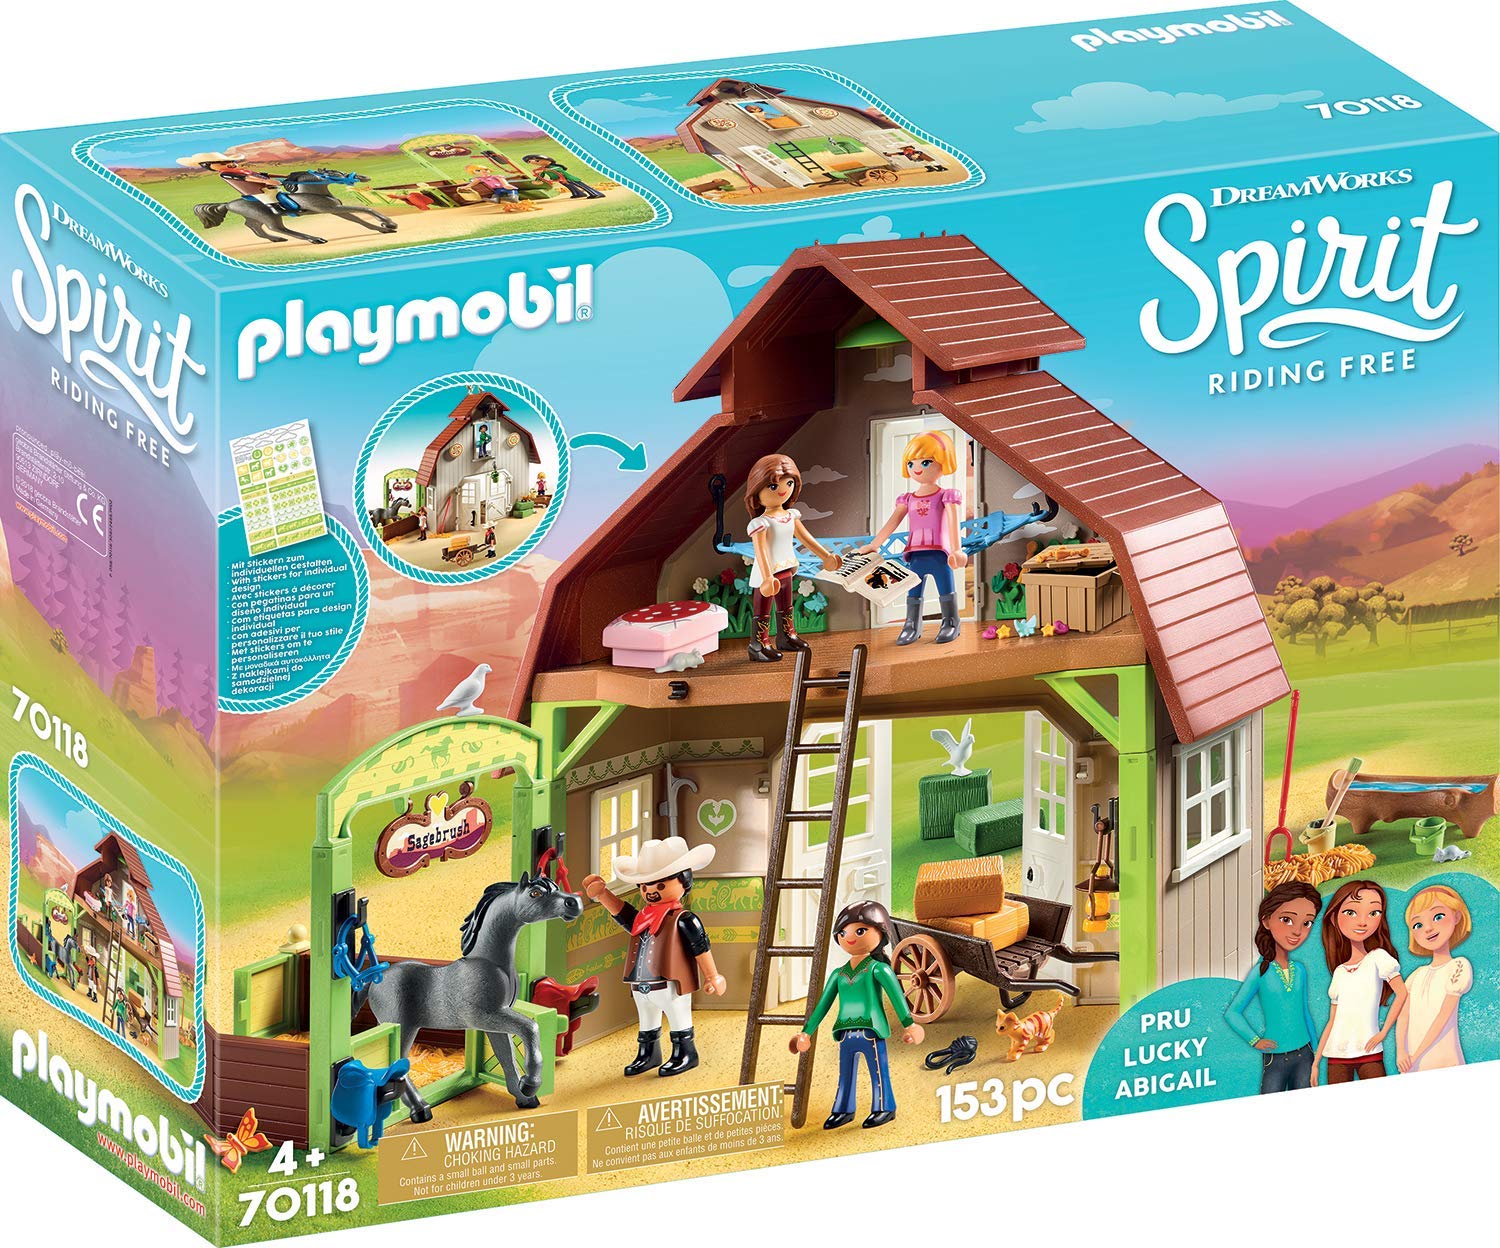 Playmobil Spirit Riding Free Hutch With Lucky Pru And Abigail Colourful